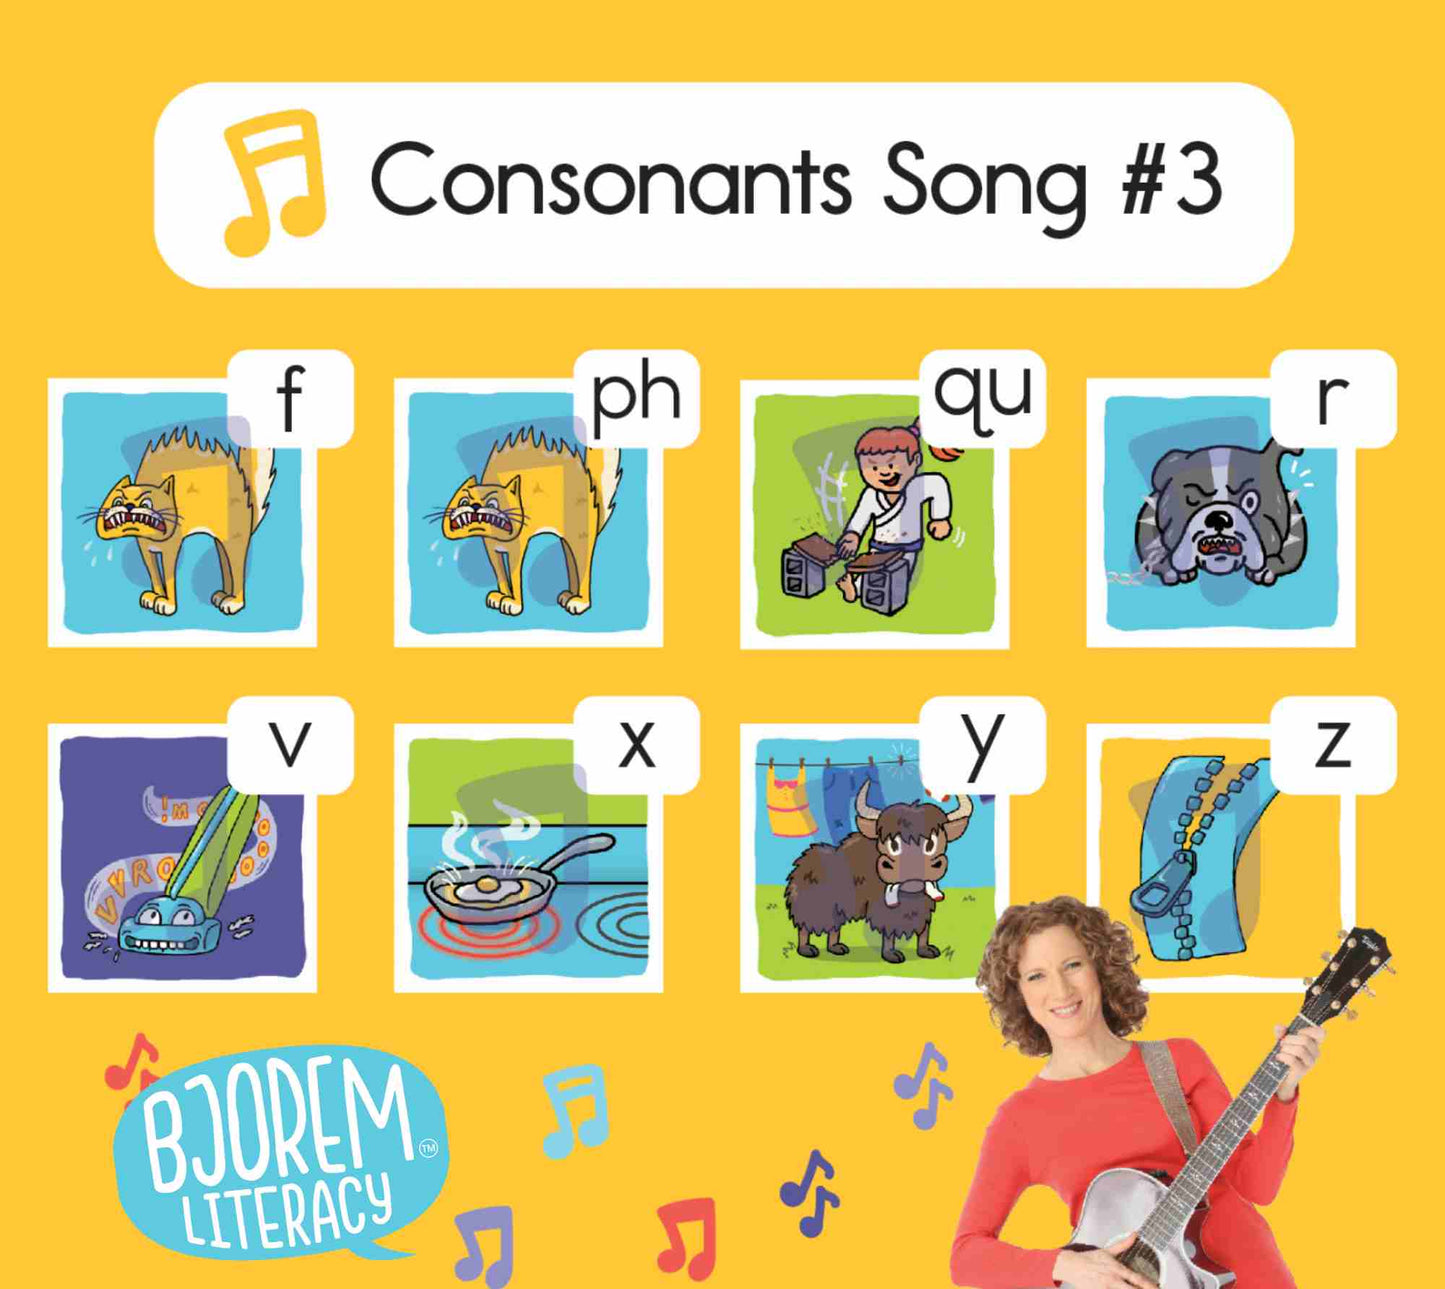 Bjorem Better Letters™ with The Laurie Berkner Band Card Deck PreSale -Ships June 15th